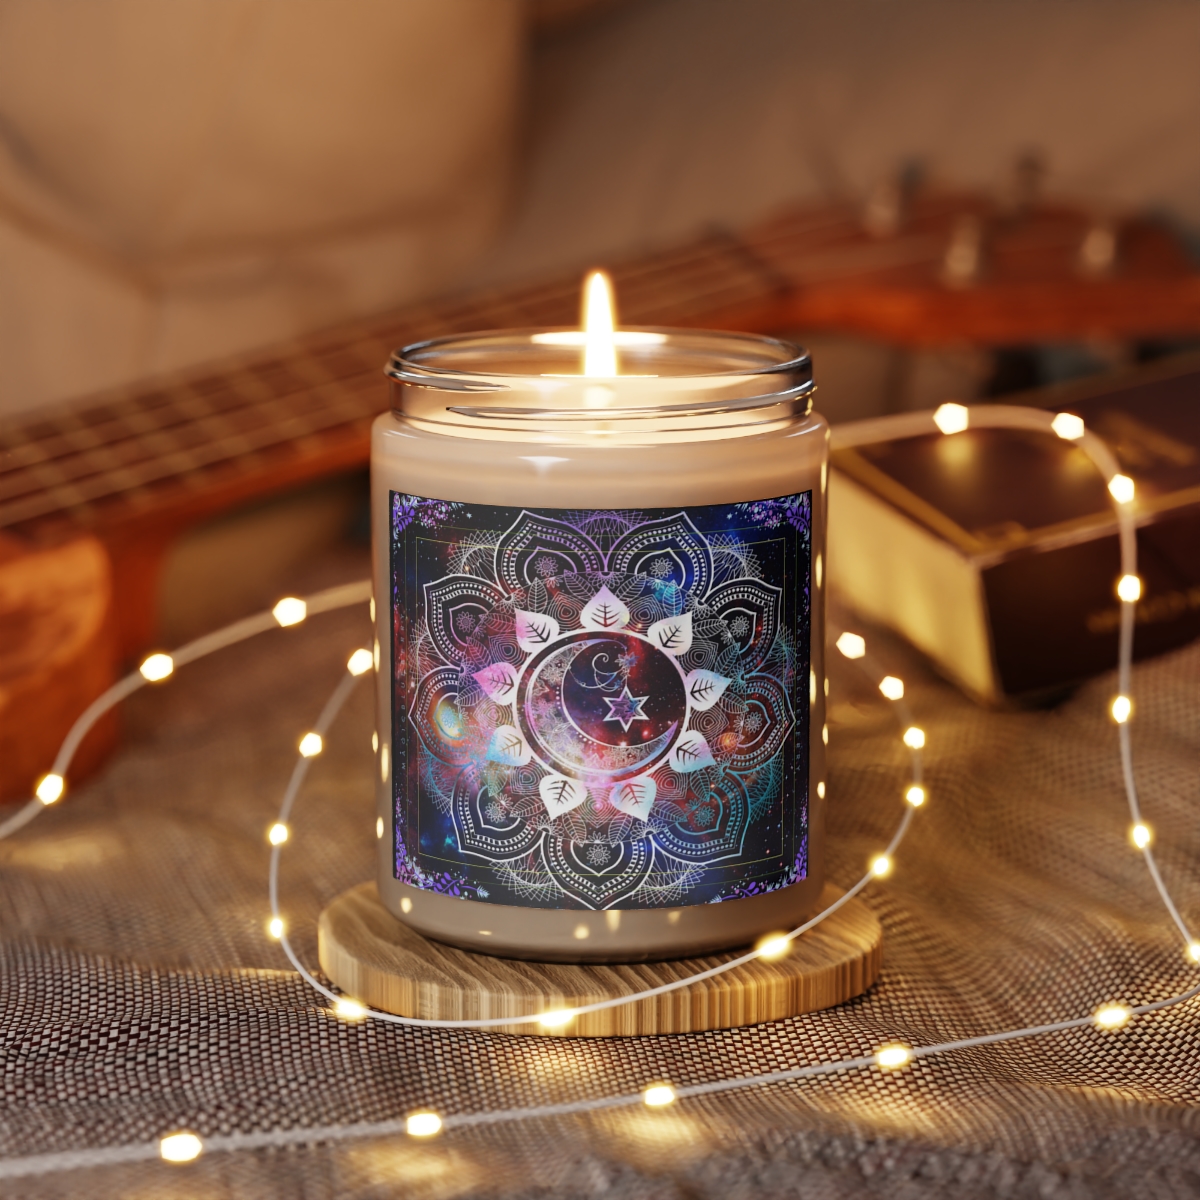 Mandala Moon Magic Spell - Scented Soy Wax Candle | Moon Candle | Manifestation Spell Candle Jar | Coconut Soy Candle 9oz | Aromatherapy product thumbnail image